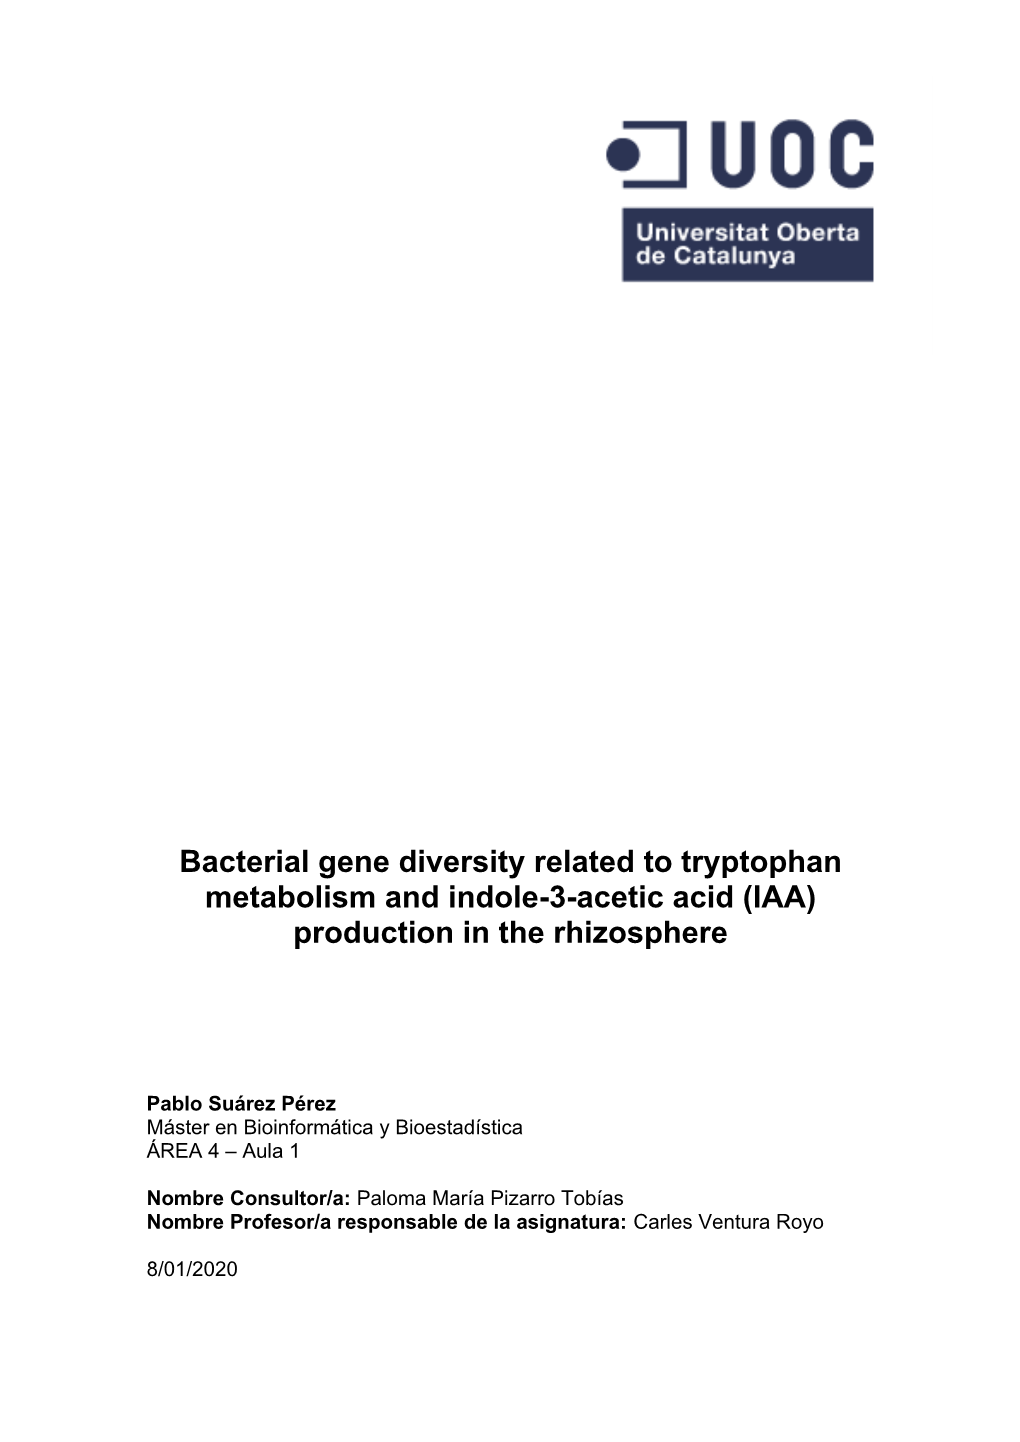 Bacterial Gene Diversity Related to Tryptophan Metabolism and Indole-3-Acetic Acid (IAA) Production in the Rhizosphere